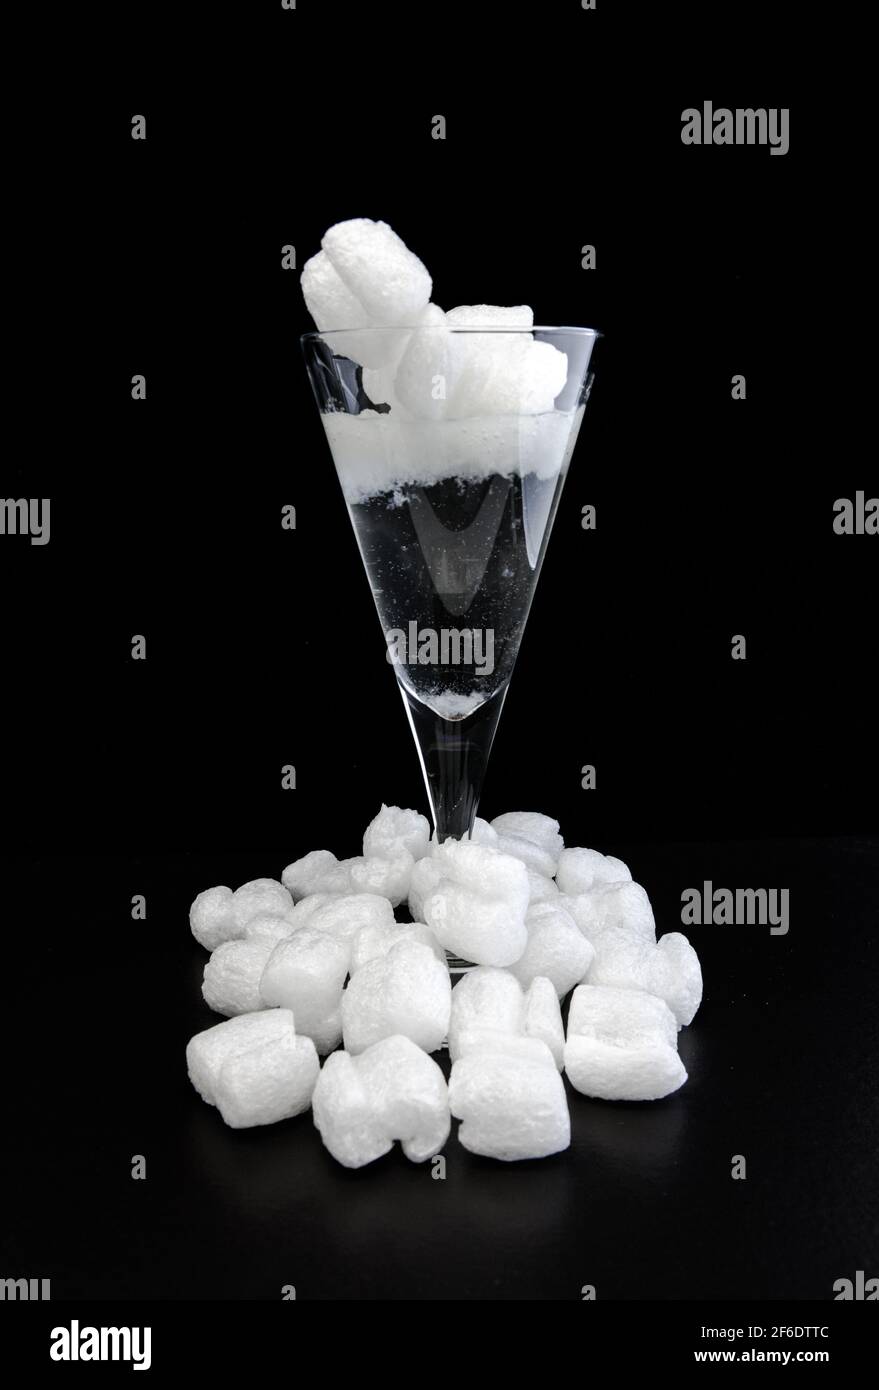 Biodegradable protective loose fill chips made from starch dissolve in a vine glass of water. Stock Photo